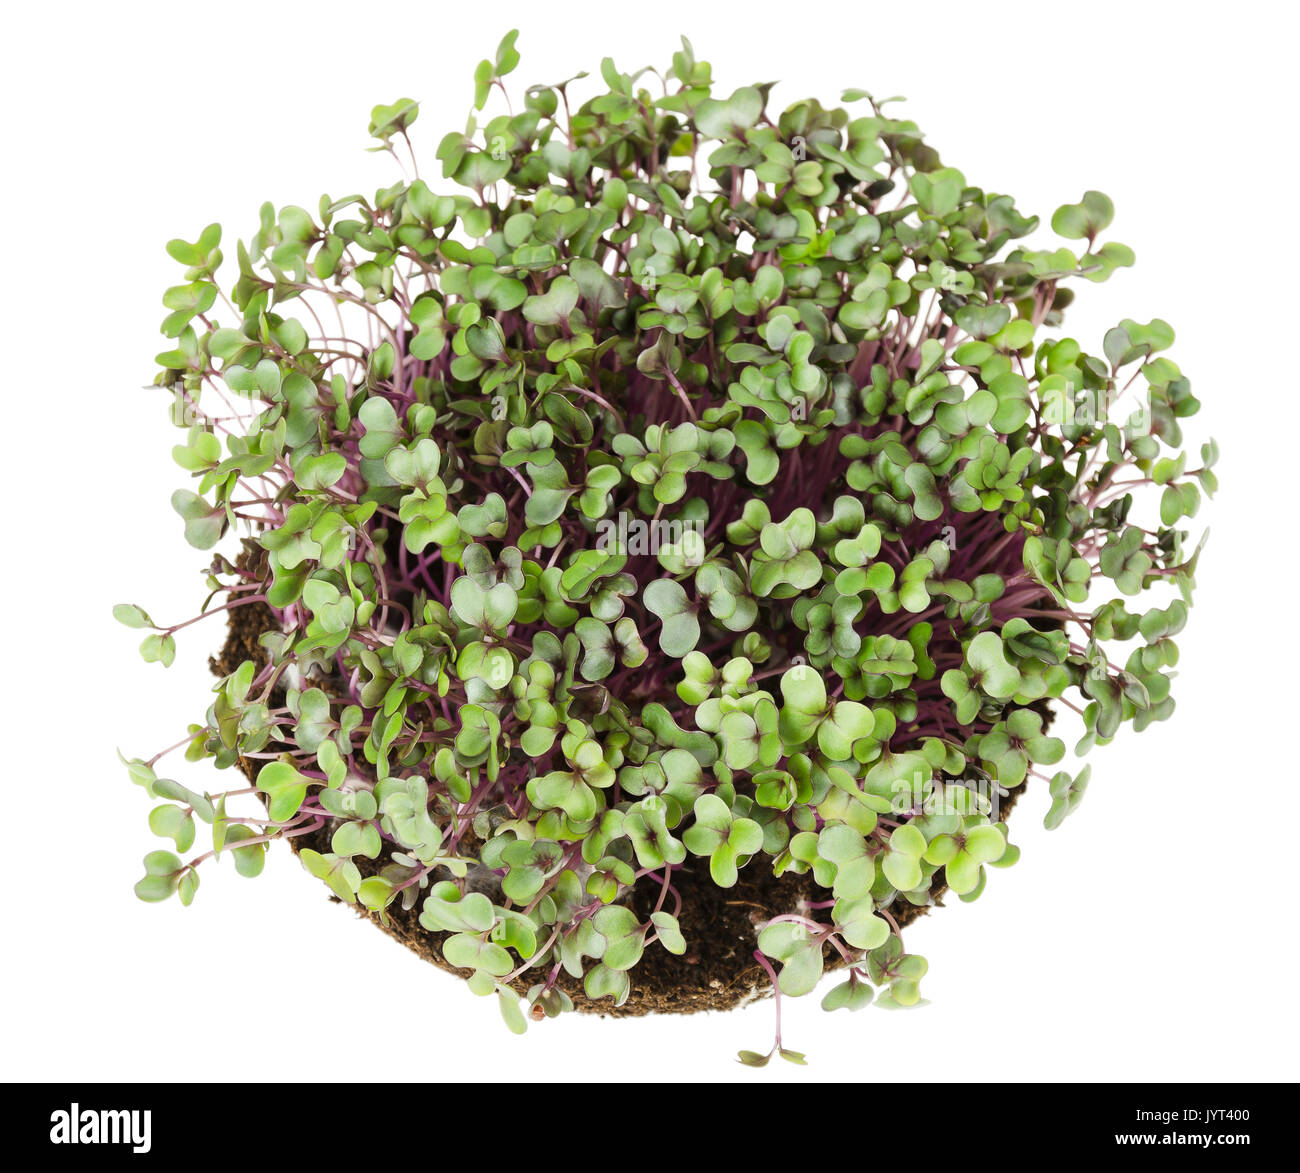 Red cabbage, fresh sprouts and young leaves from above. Edible vegetable and microgreen. Also known as purple cabbage, red kraut or blue kraut. Stock Photo